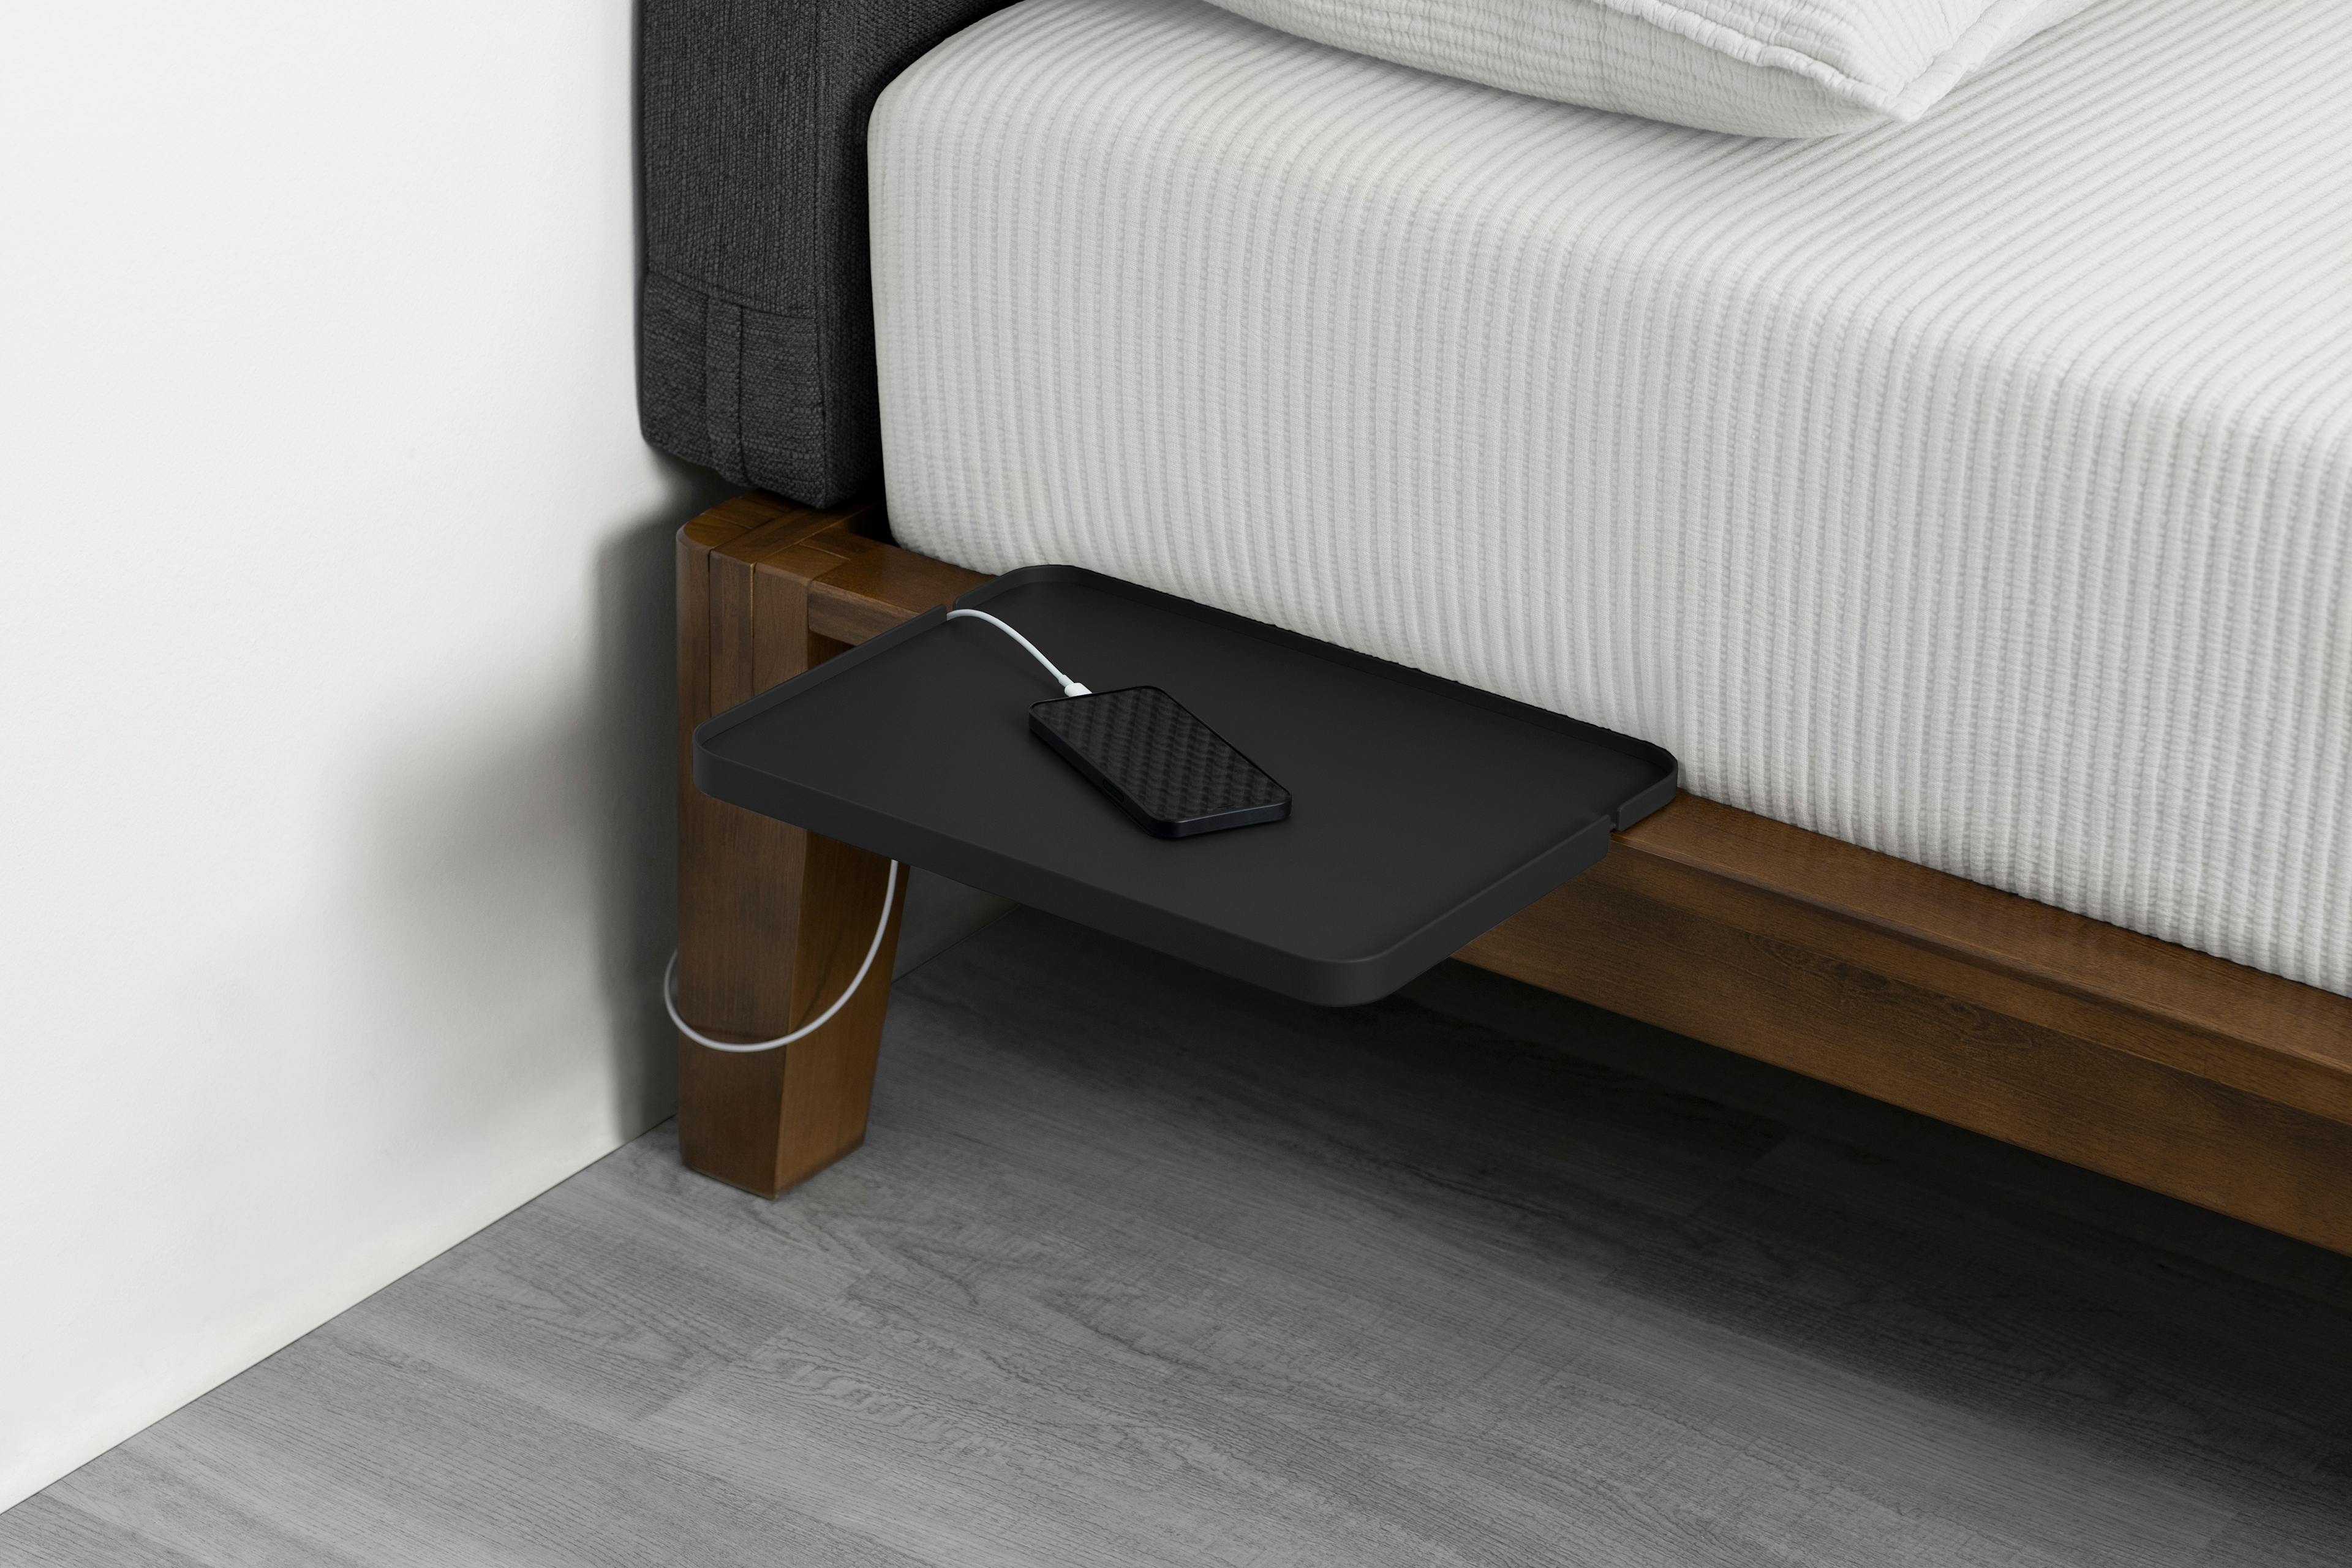 The Tray in Matte Black Color Displayed with a Phone, Perfect for Bedside Storage